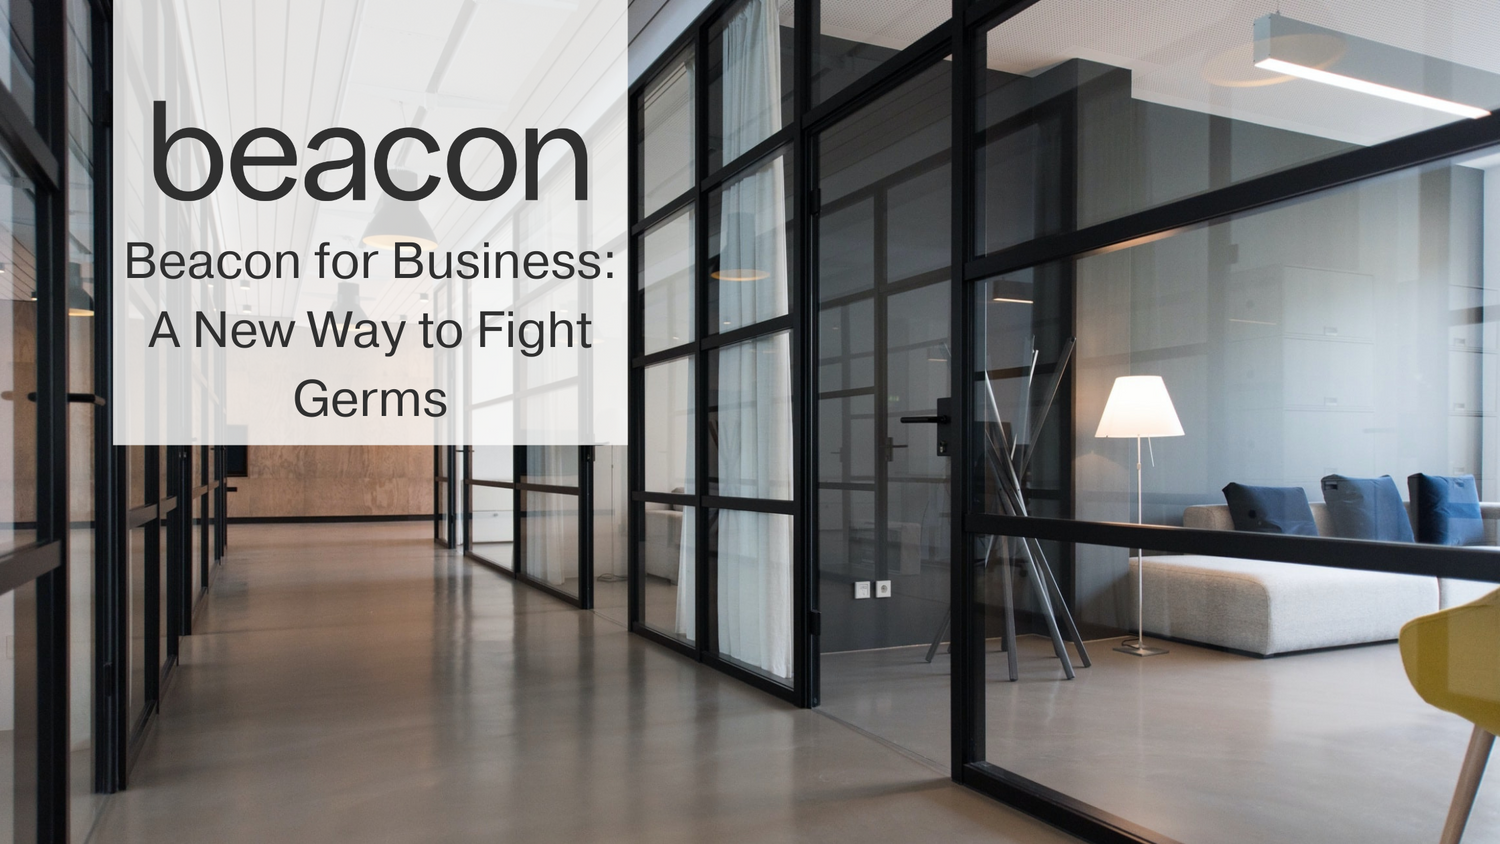 Beacon for Business: A New Way to Fight Germs